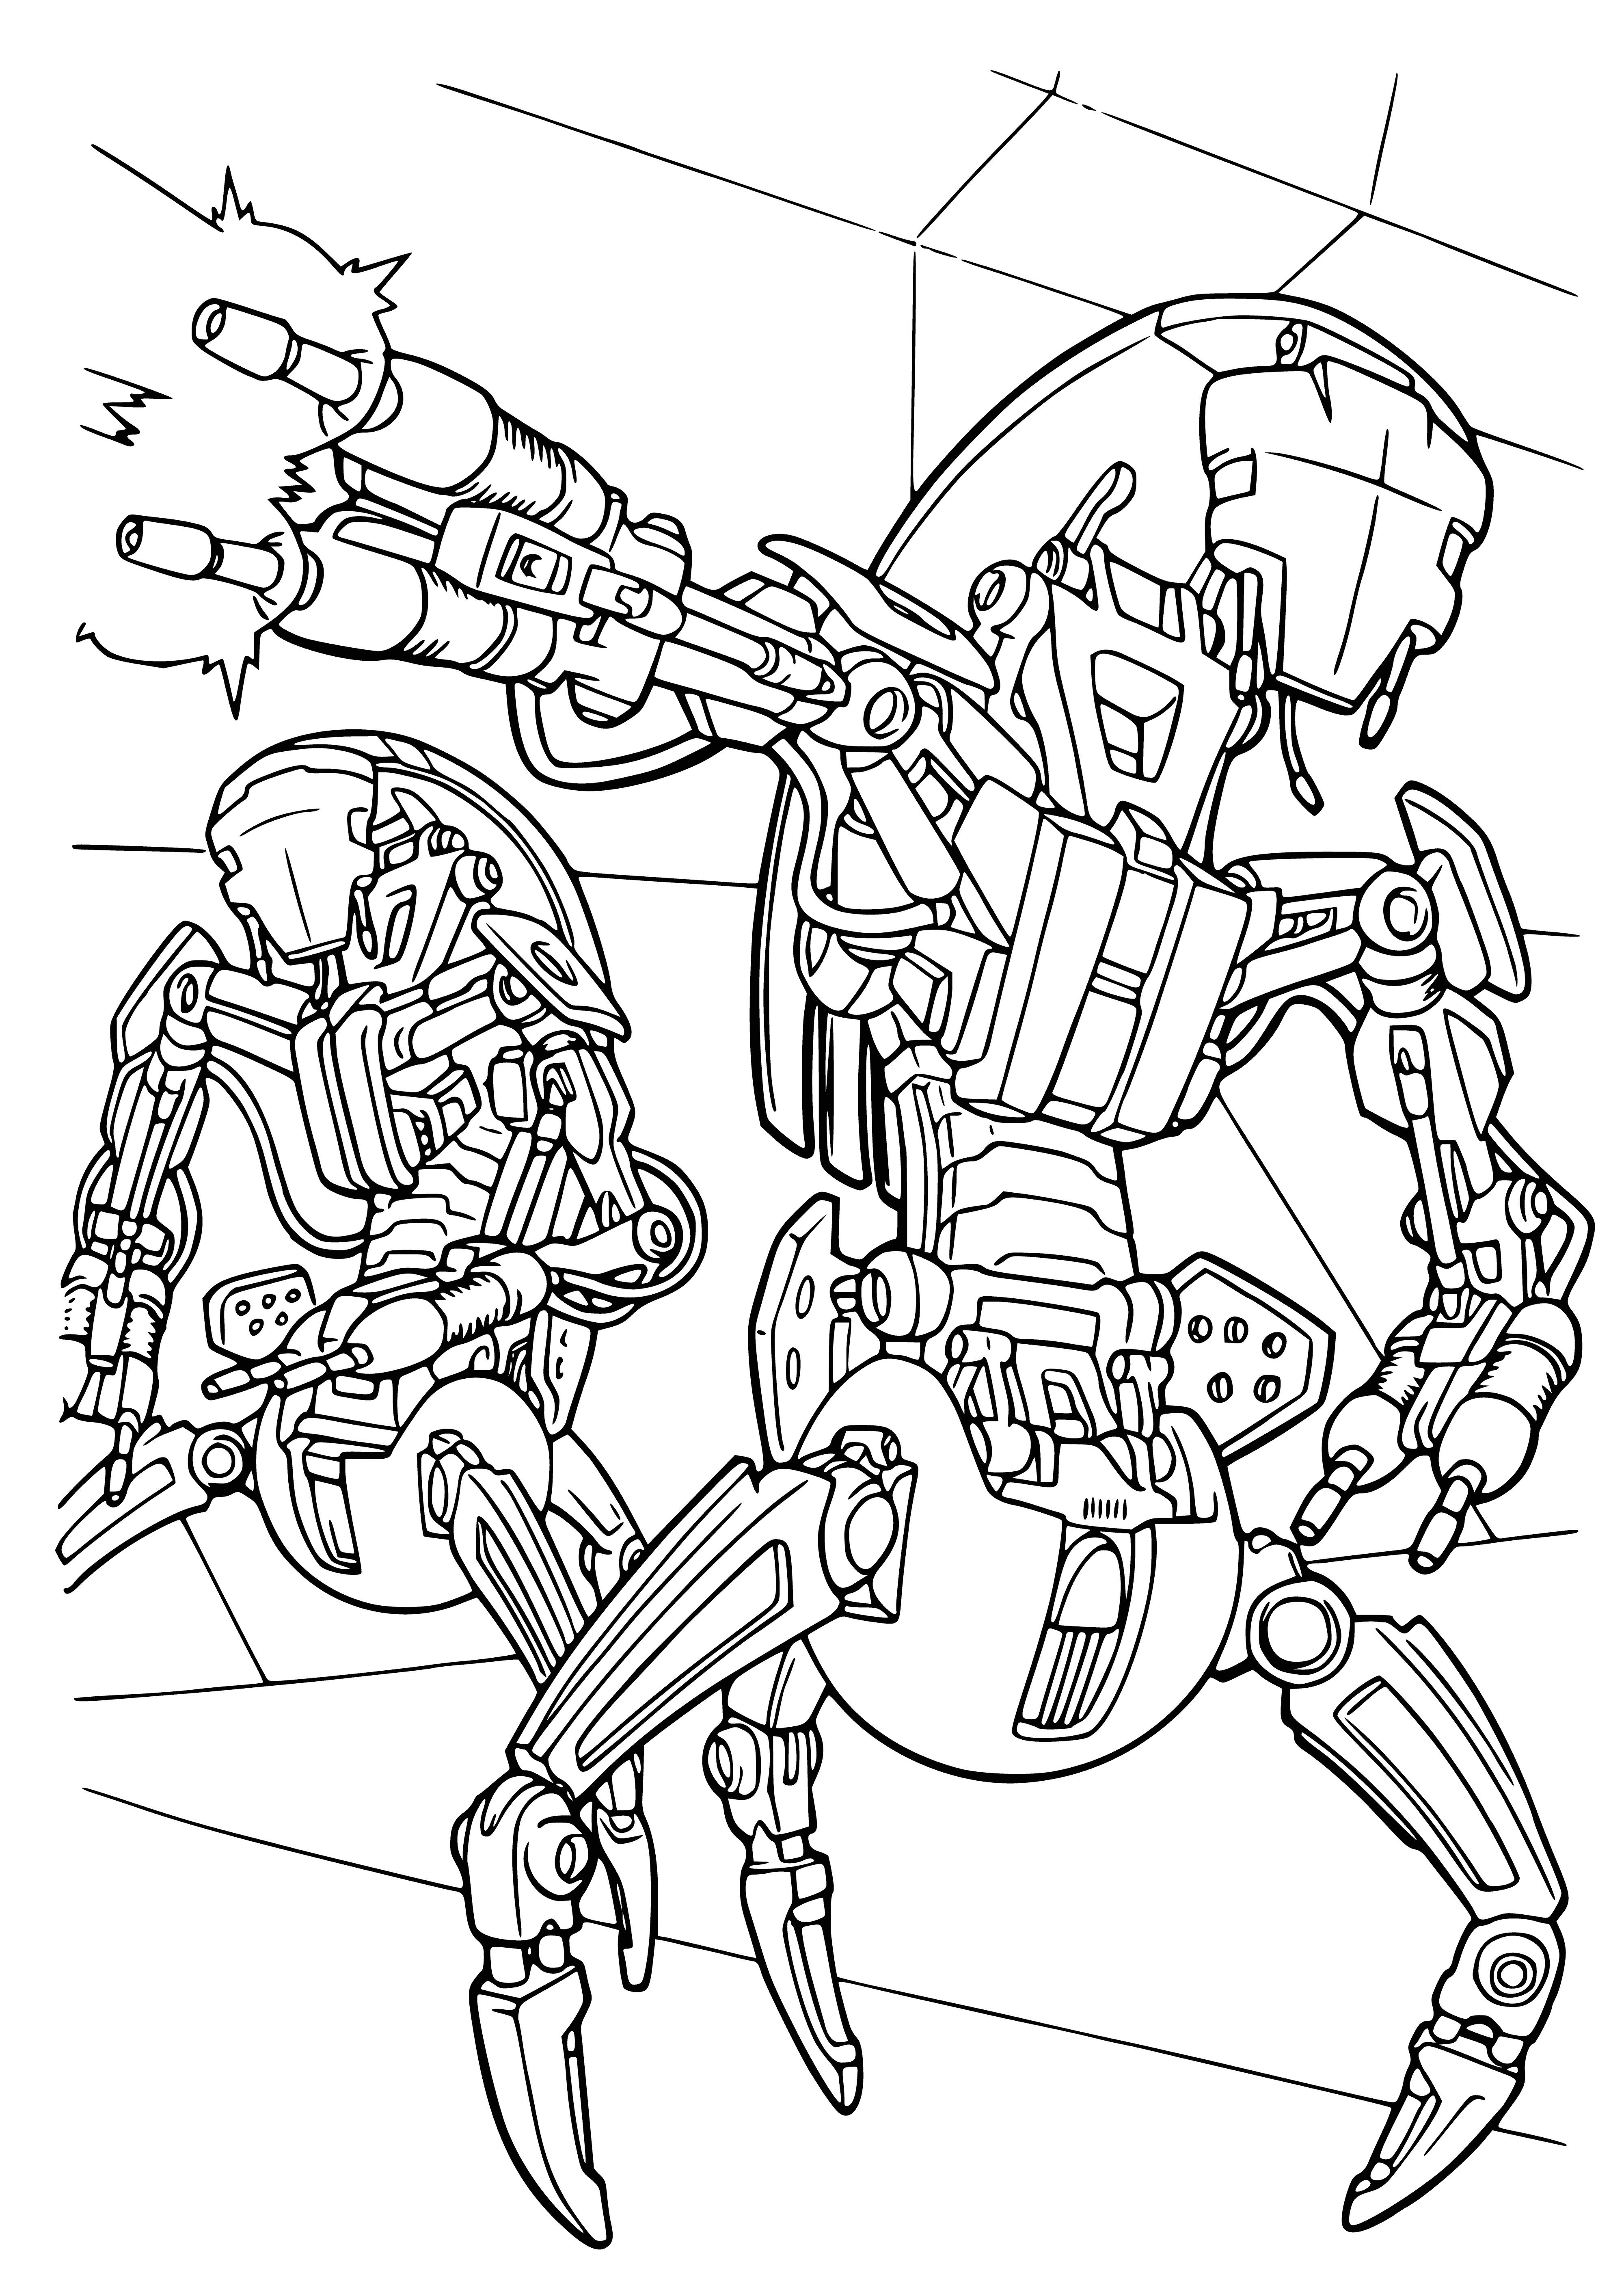 Droideka (Destroyer Droid) coloring page